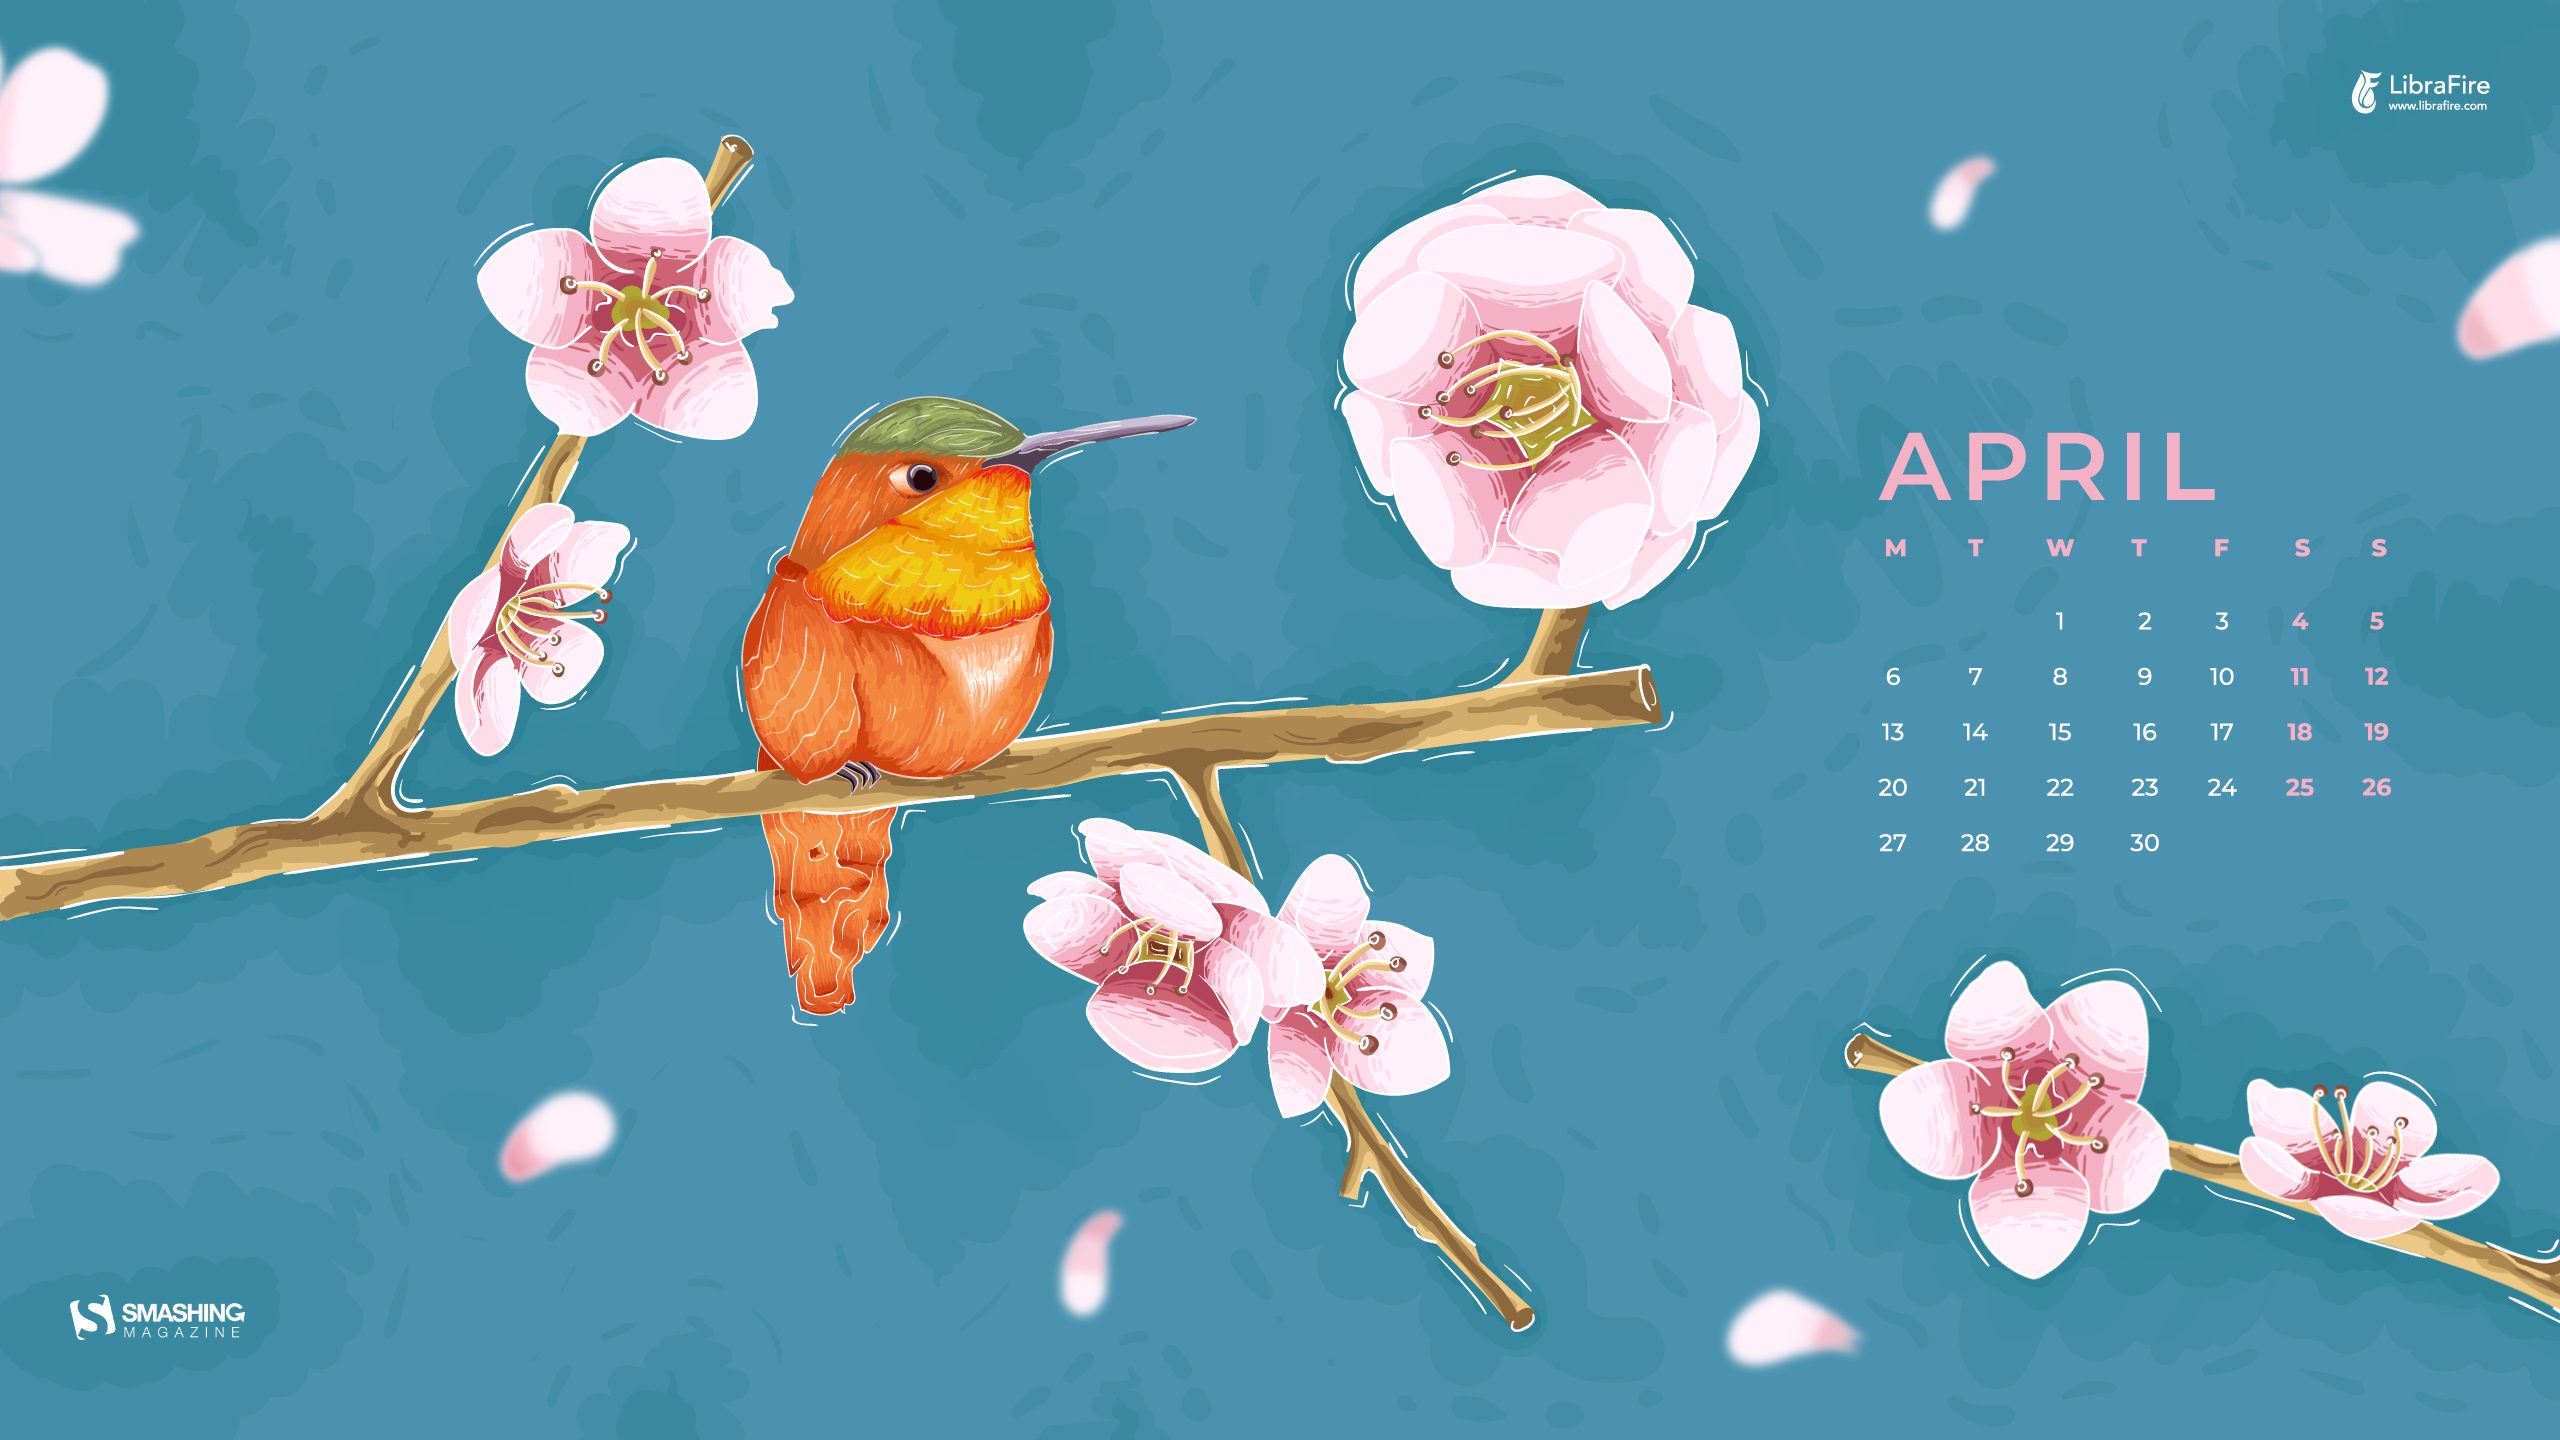 Stay creative stay inspired april wallpapers edition â smashing magazine